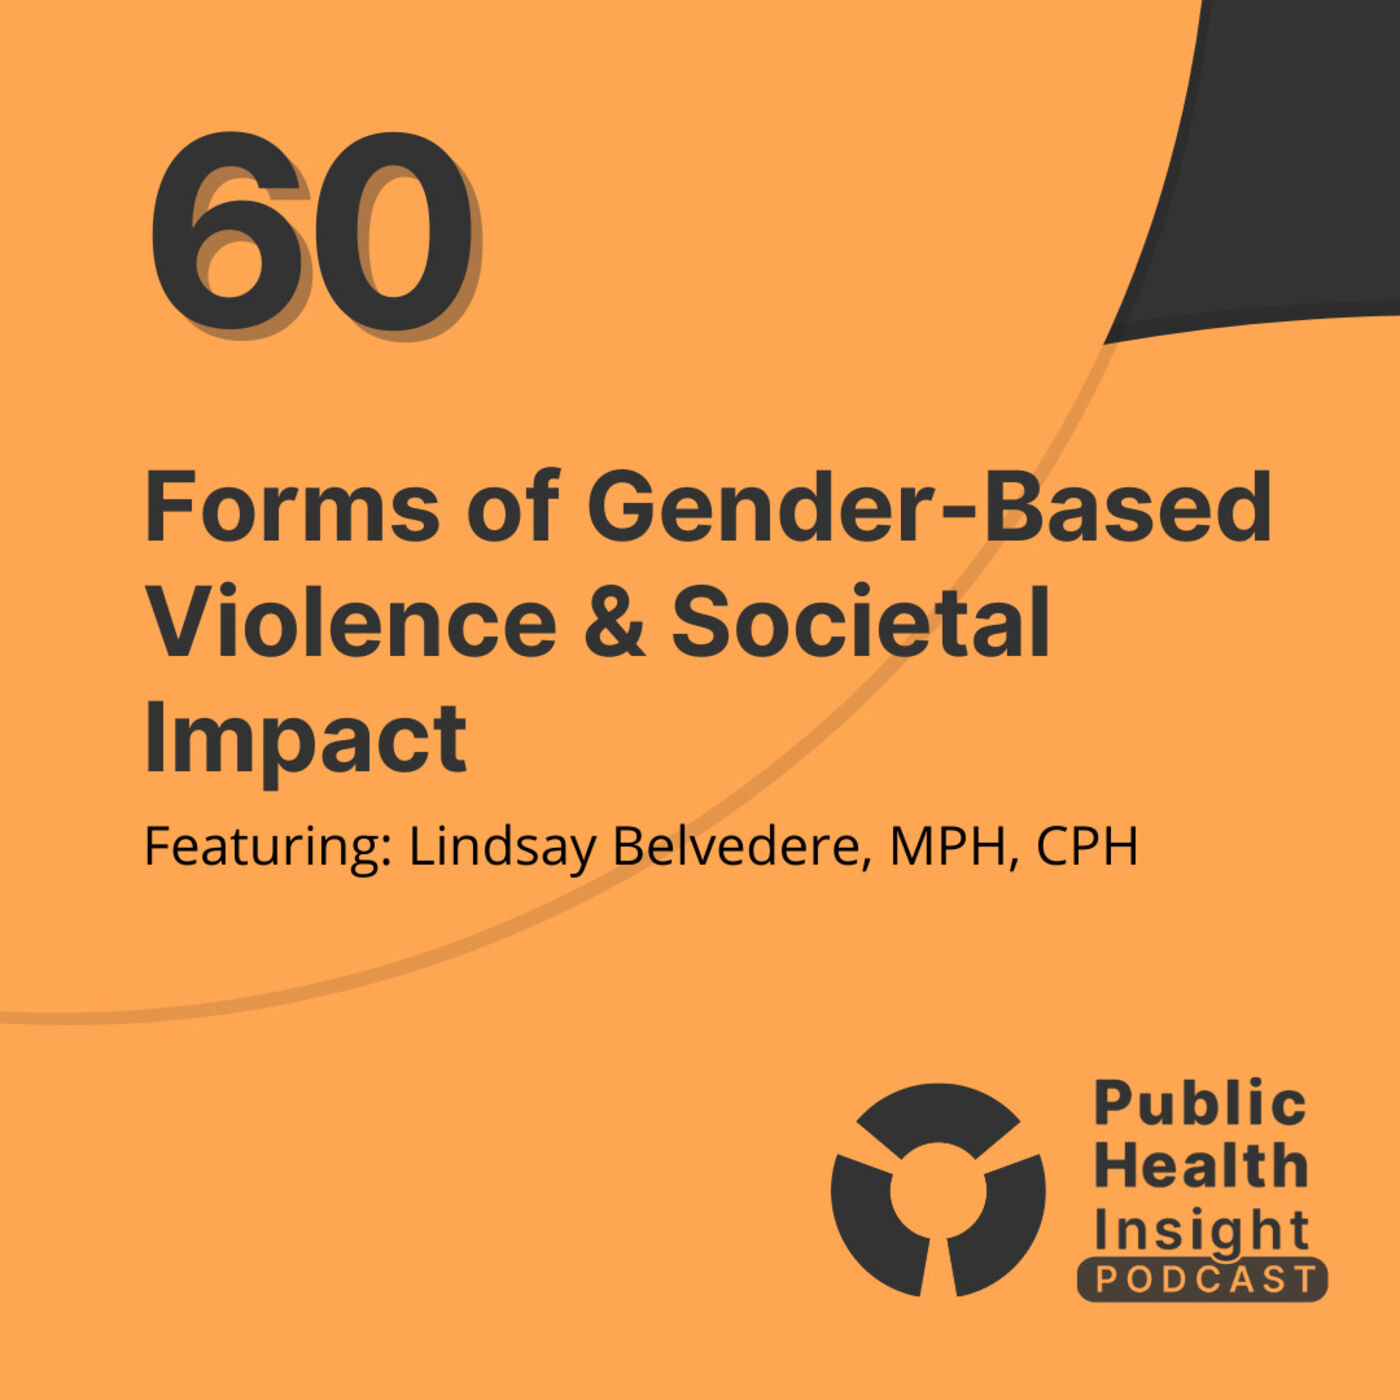 Forms of Gender-Based Violence & Societal Impact - Public Health Insight